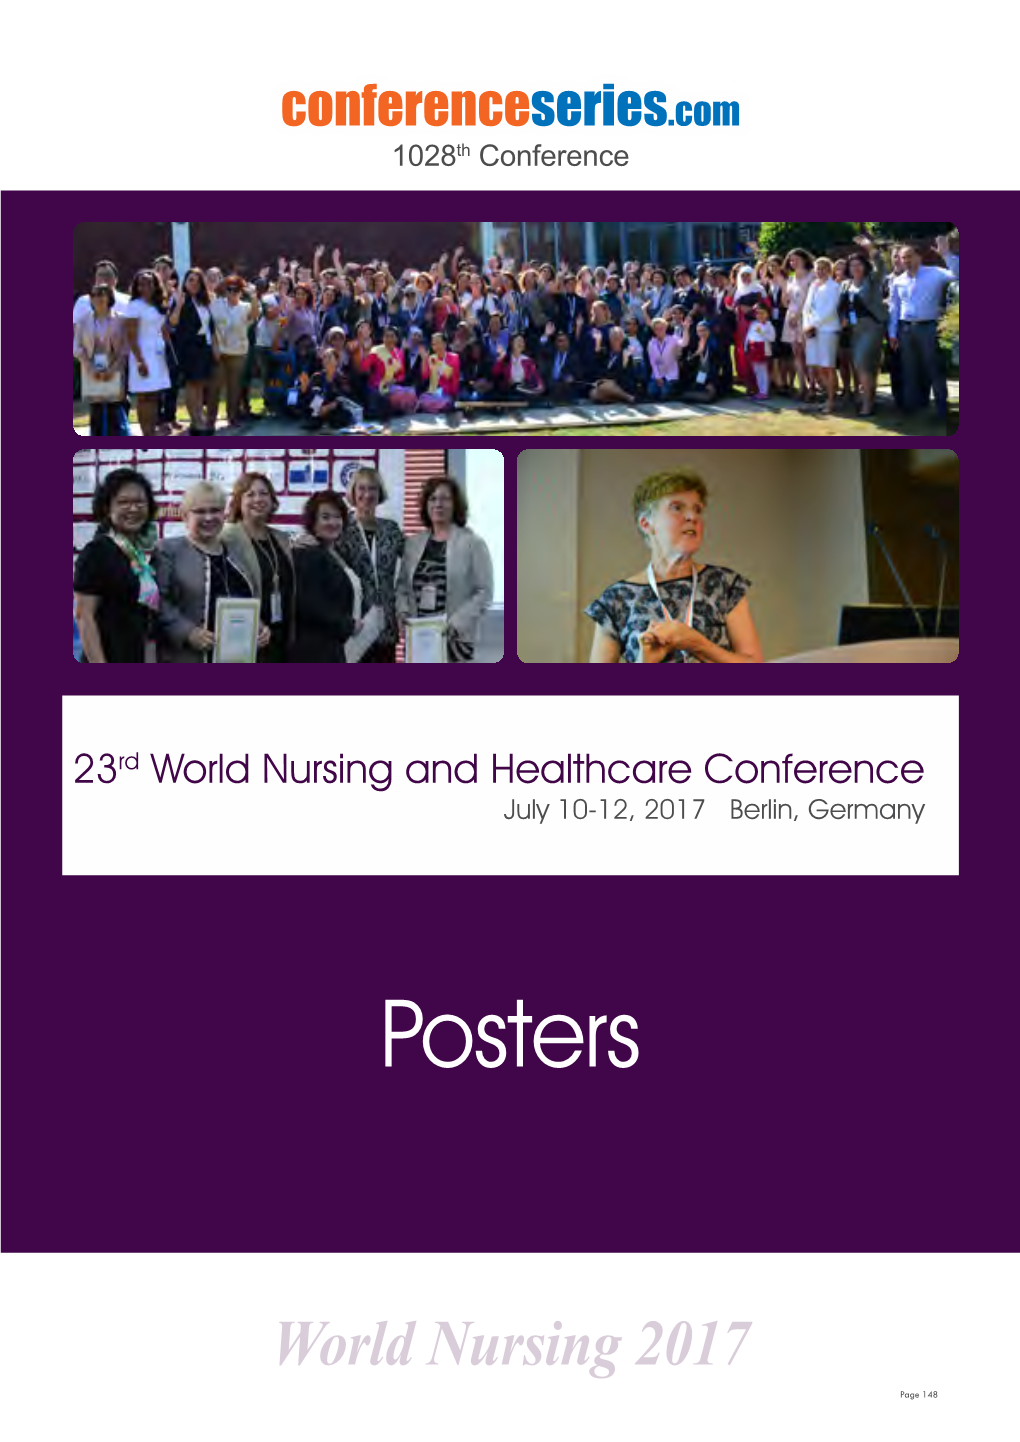 23Rd World Nursing and Healthcare Conference July 10-12, 2017 Berlin, Germany